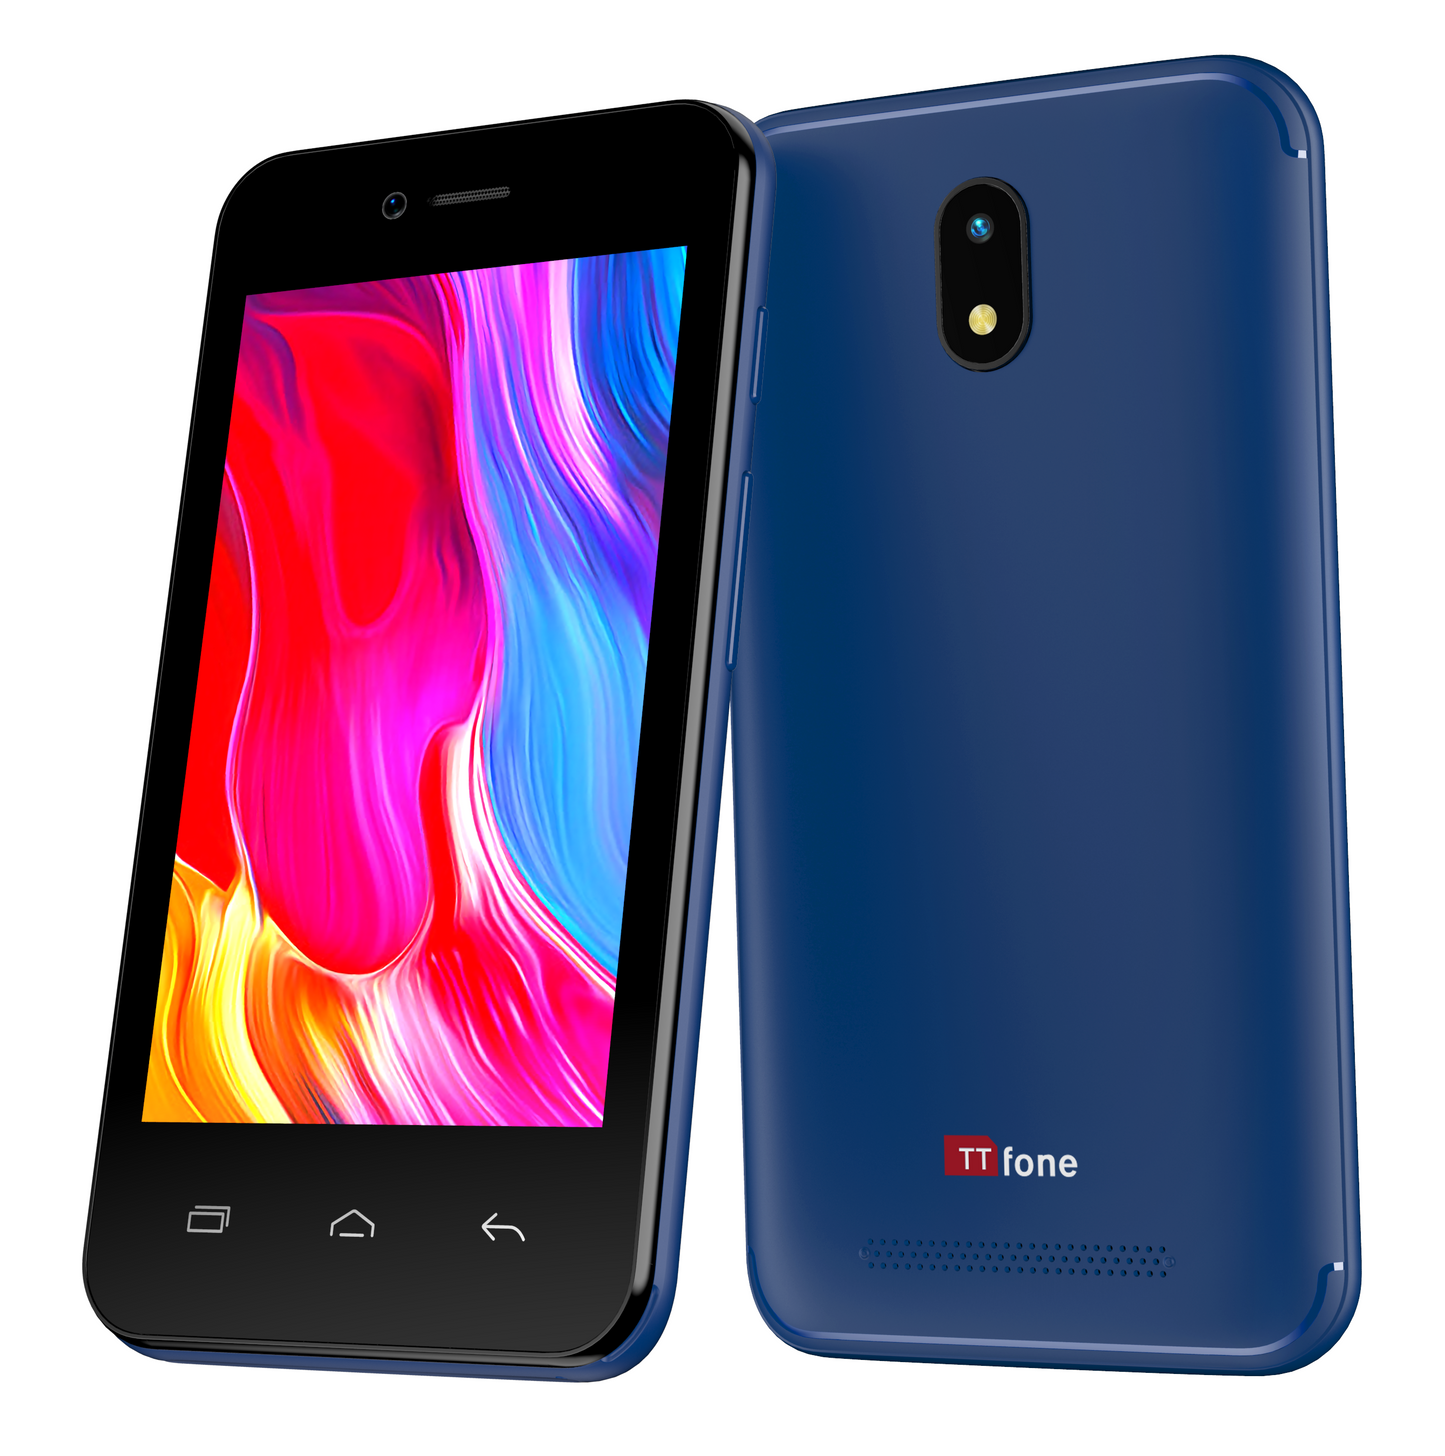 TTfone Blue TT20 Dual SIM - Warehouse Deals with Mains Charger and O2 Pay As You Go Sim Card